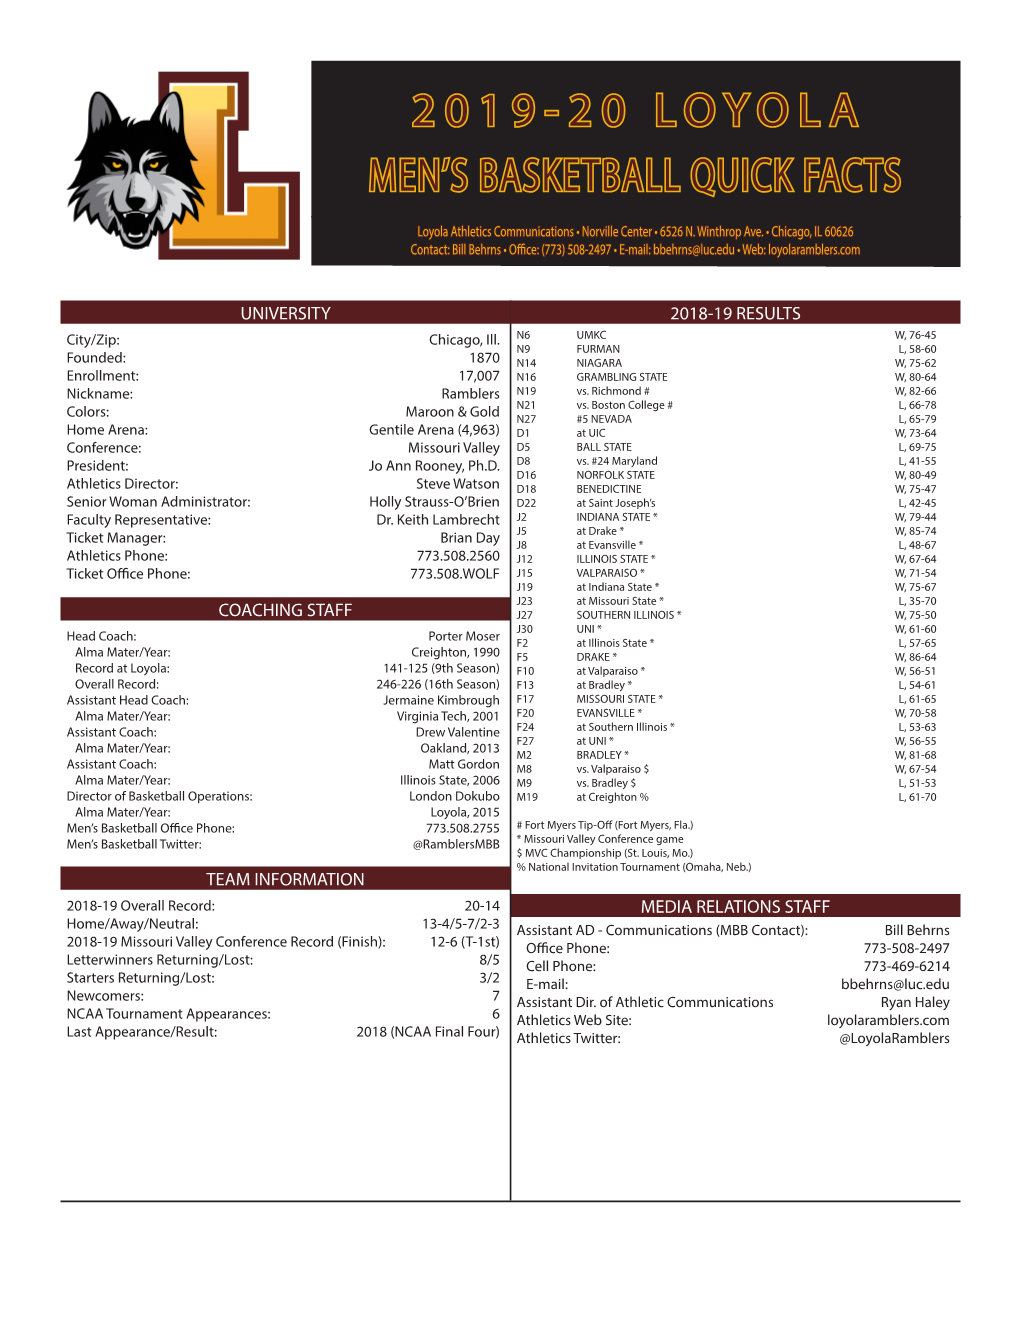 2019-20 Loyola Men's Basketball Quick Facts